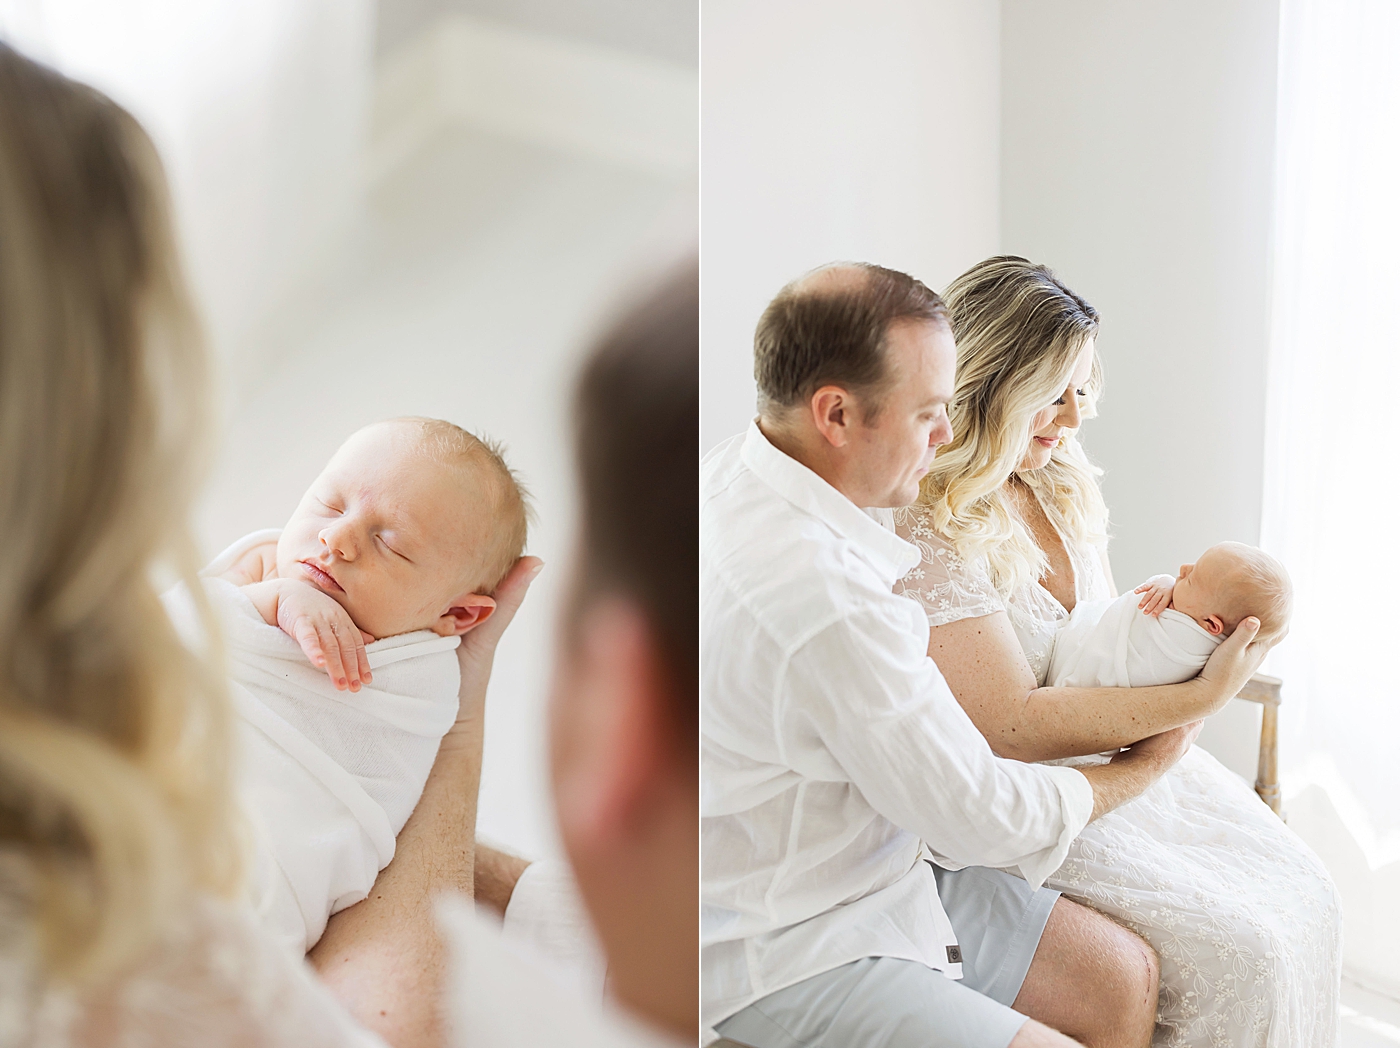 New parents with their newborn son. Photo by Fresh Light Photography.